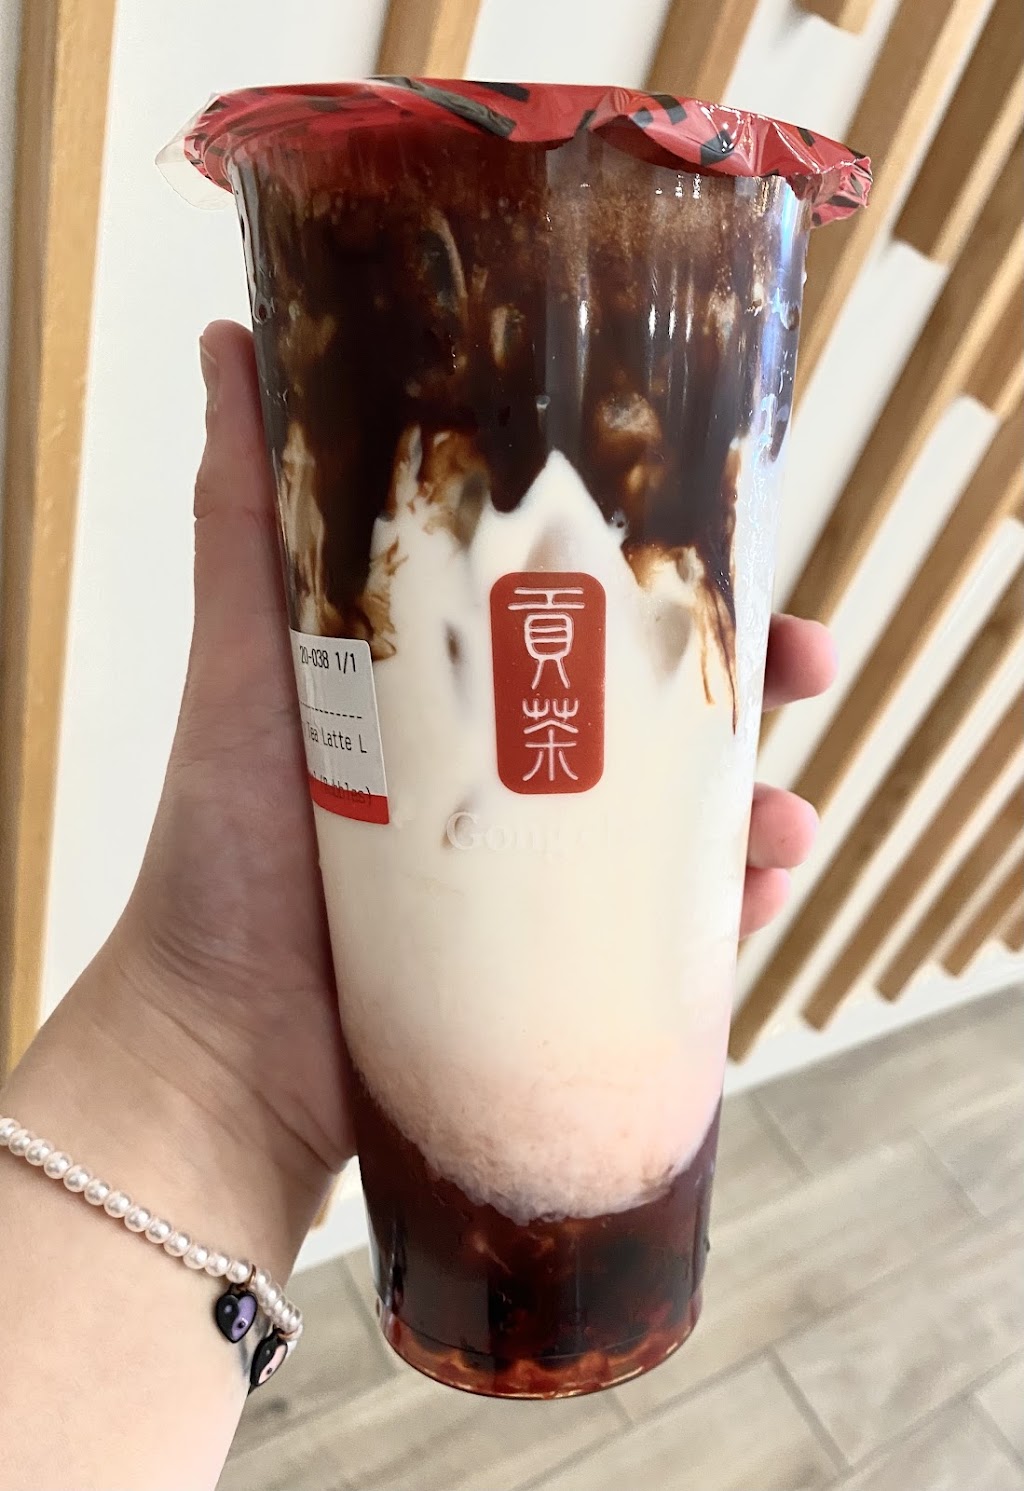 Gong Cha | 29110 US-290 suite #250, Cypress, TX 77433, USA | Phone: (832) 653-2908